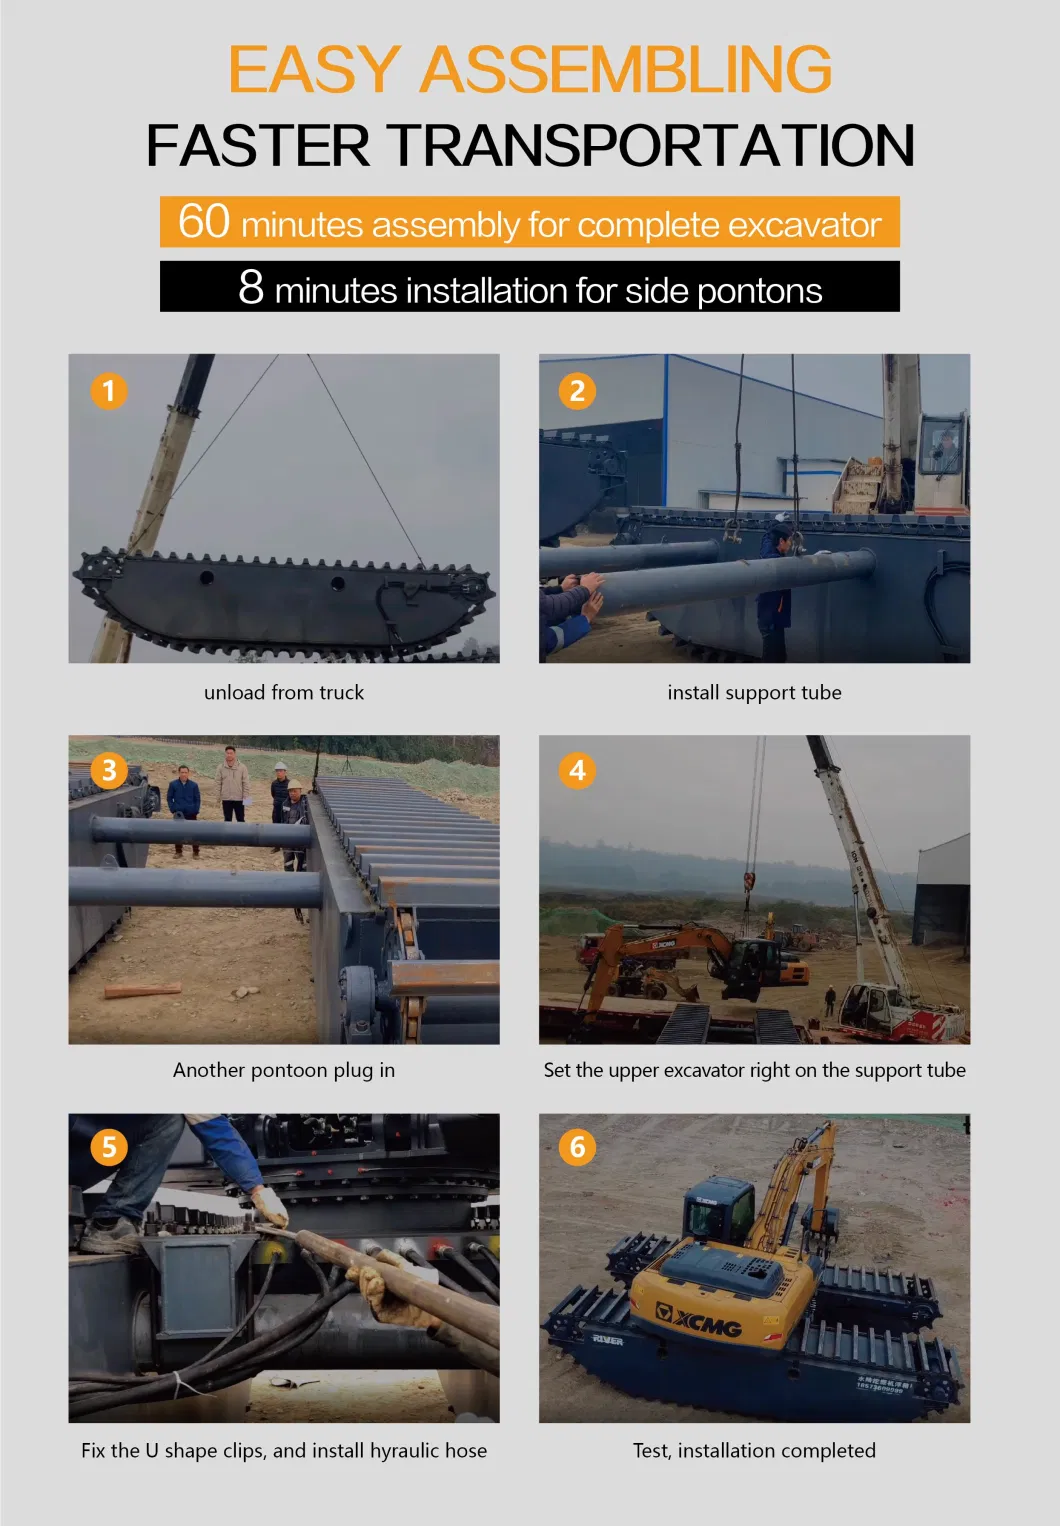 River-300 Energy Mining Swamp Drilling Amphibious Excavator Hydraulic Crawler Excavators with Floating Undercarriage Excavator Pontoons and Track Link